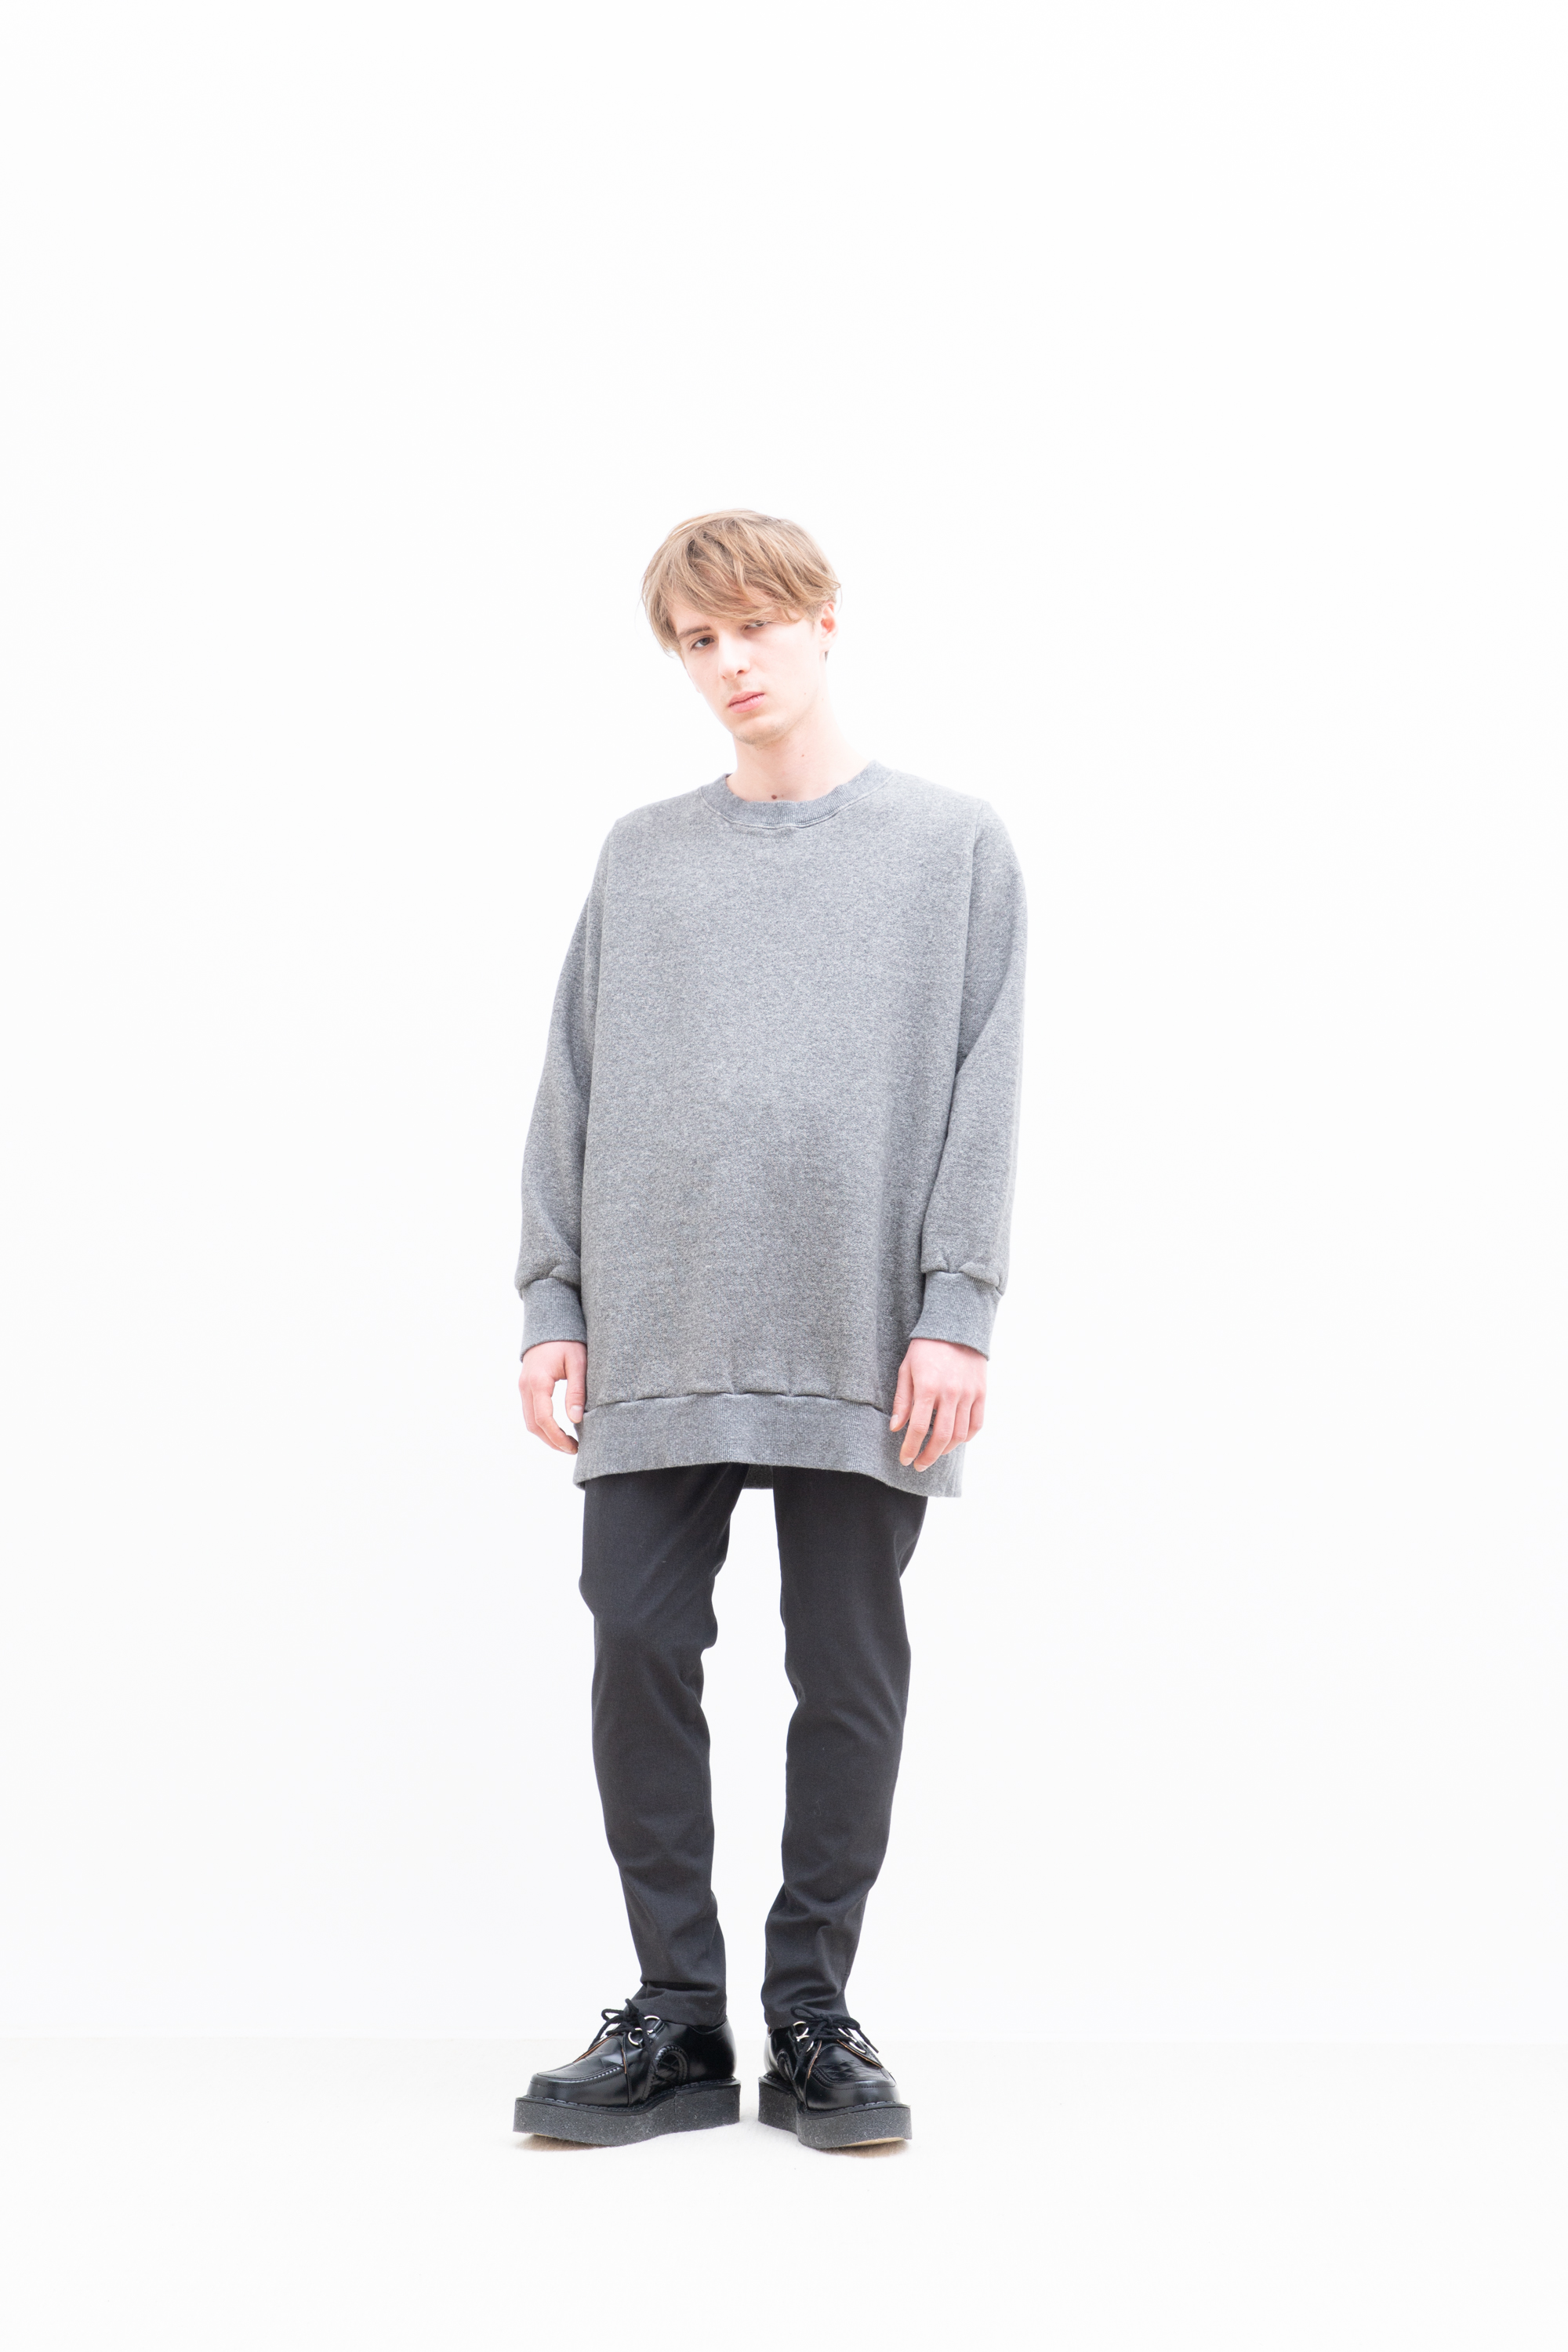 No. 058 | 2019 AW MENS | LOOK | FIRMUM